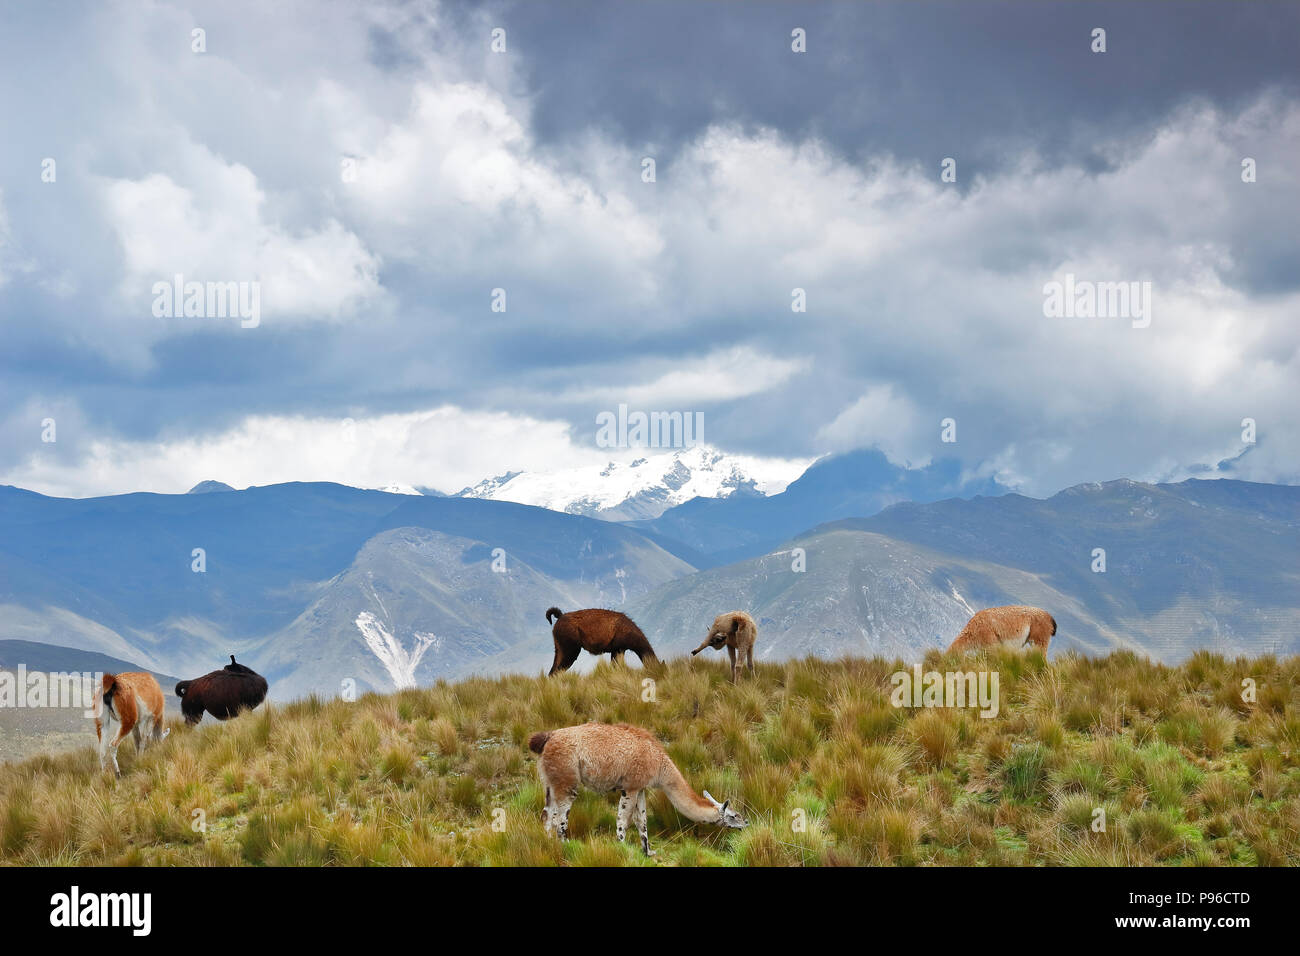 Flames and Andean landscape Stock Photo